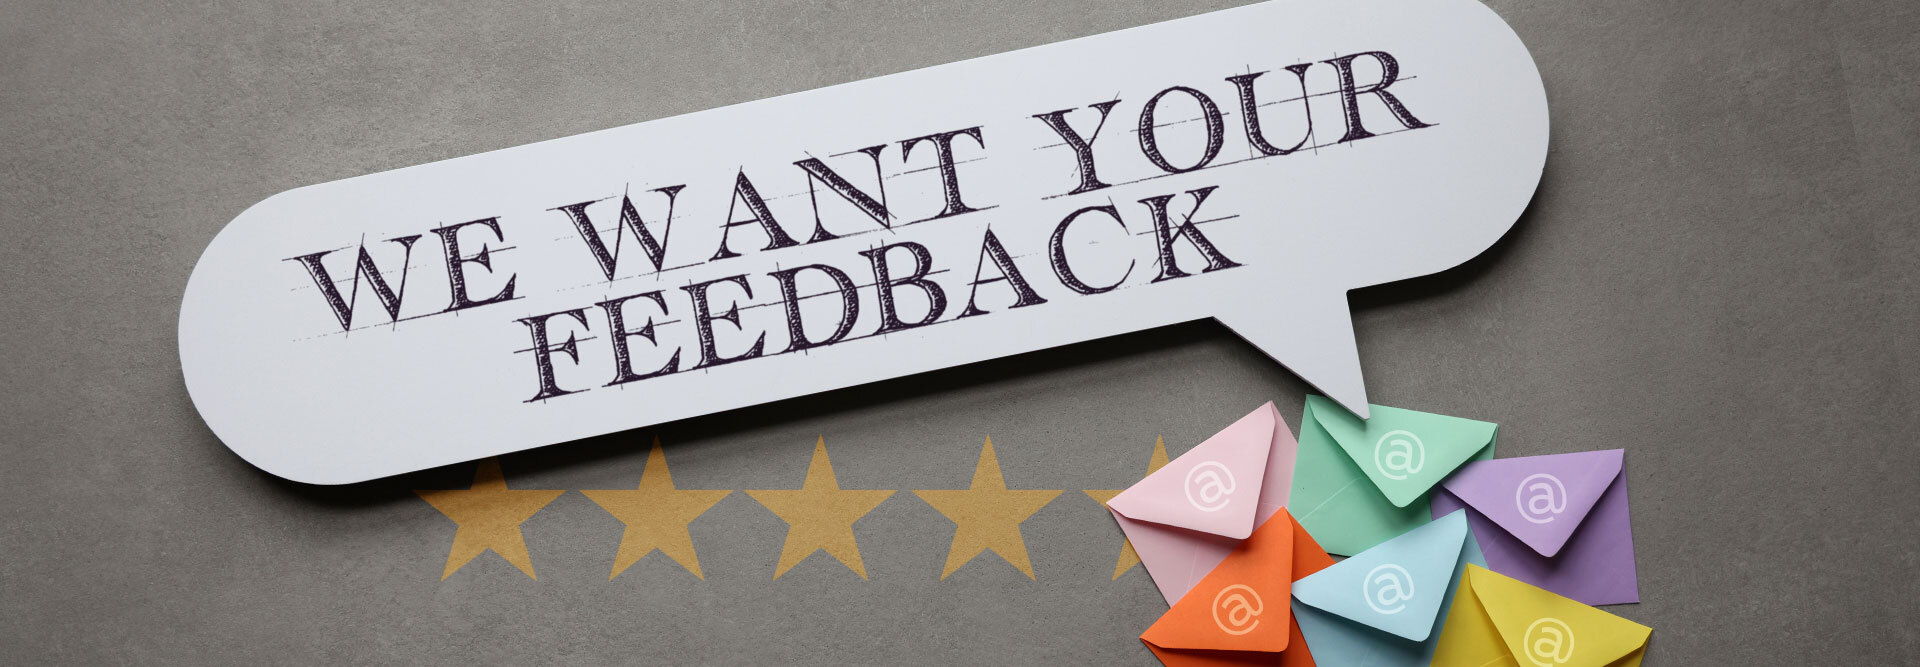 The words “We want your feedback” are written on a speech bubble with little colored envelopes and a 5-star review in the picture to depict review request email examples.